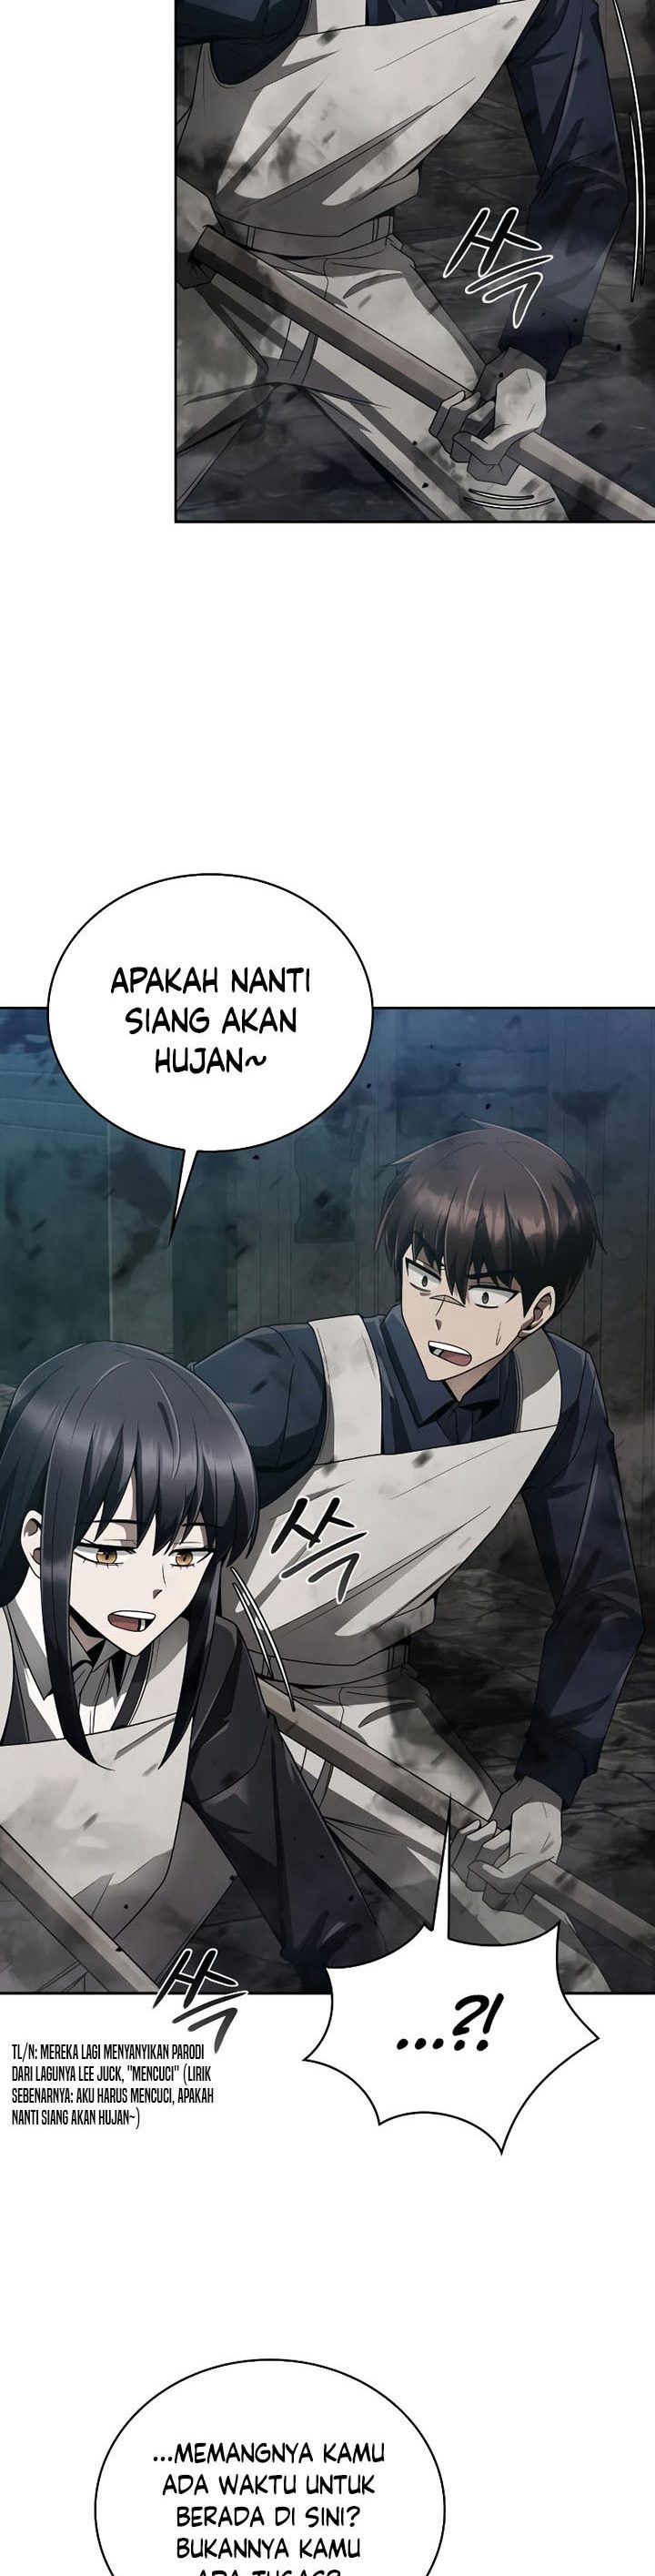 Dilarang COPAS - situs resmi www.mangacanblog.com - Komik clever cleaning life of the returned genius hunter 019 - chapter 19 20 Indonesia clever cleaning life of the returned genius hunter 019 - chapter 19 Terbaru 2|Baca Manga Komik Indonesia|Mangacan